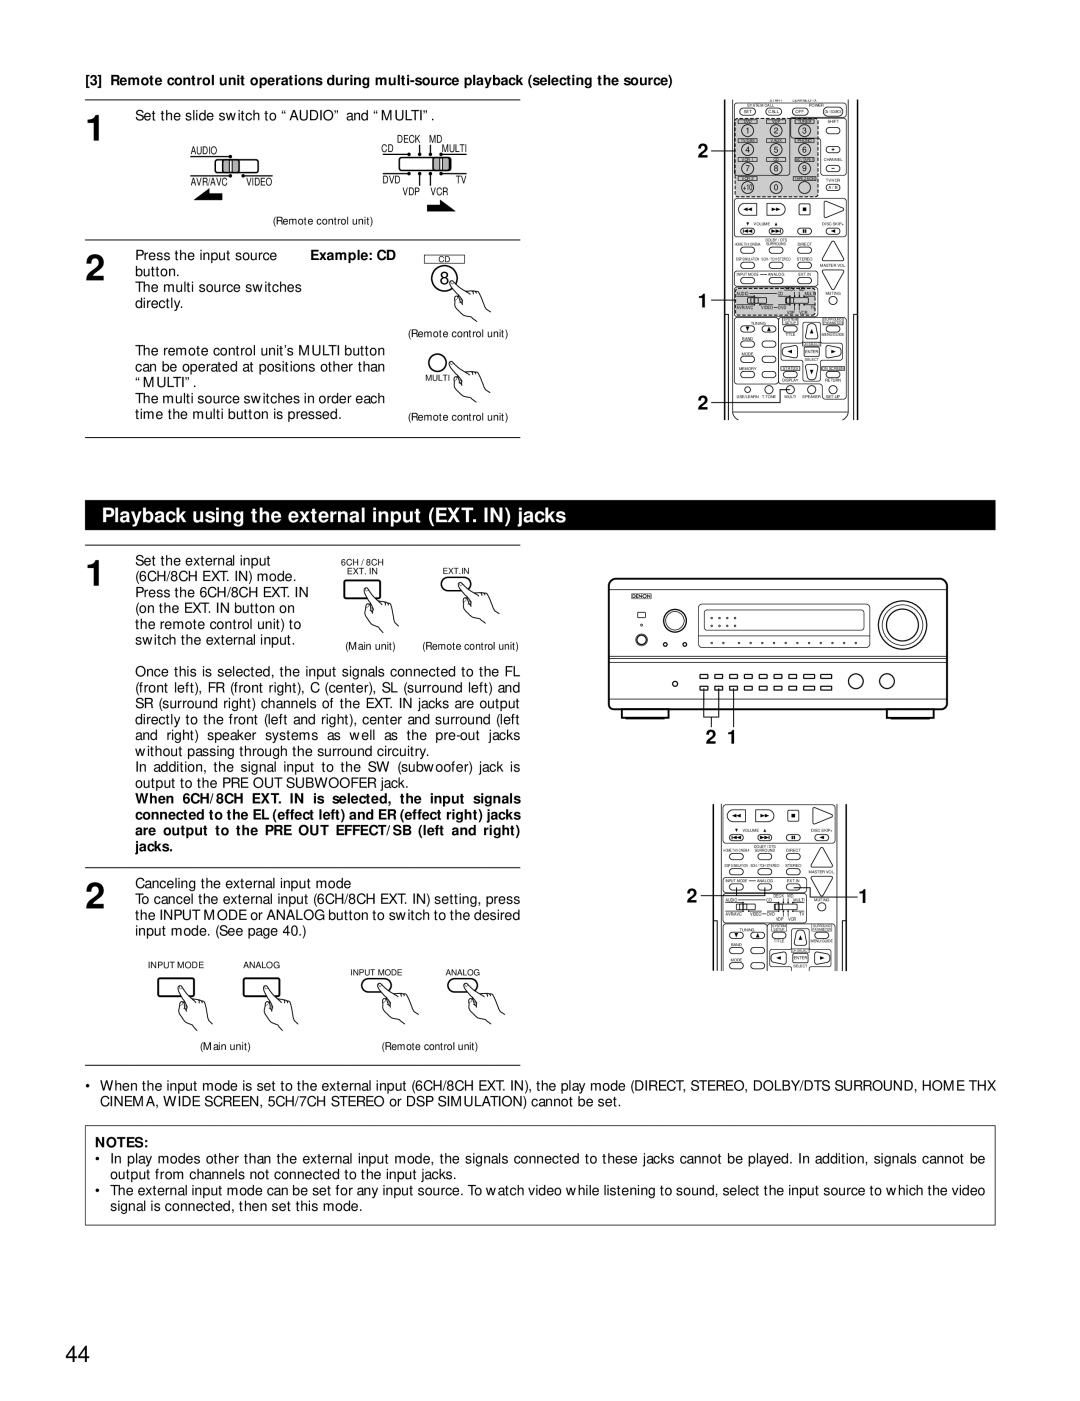 Denon AVR-4800 manual Playback using the external input EXT. IN jacks, 2 1 2, Example: CD, Notes 